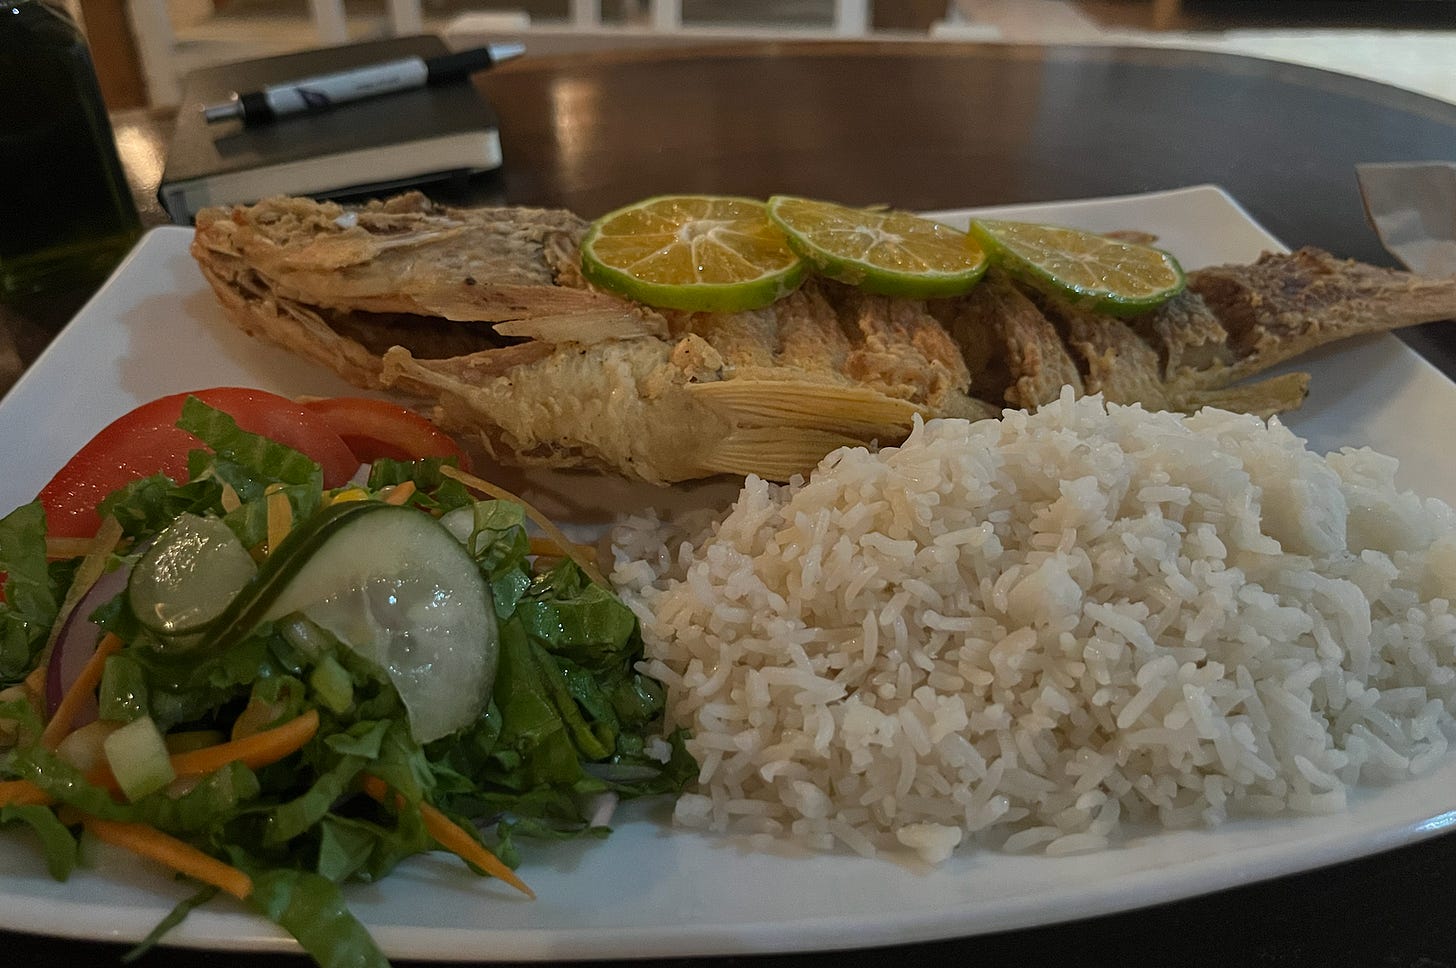 Fried snapper, salad, and white rice on plate.